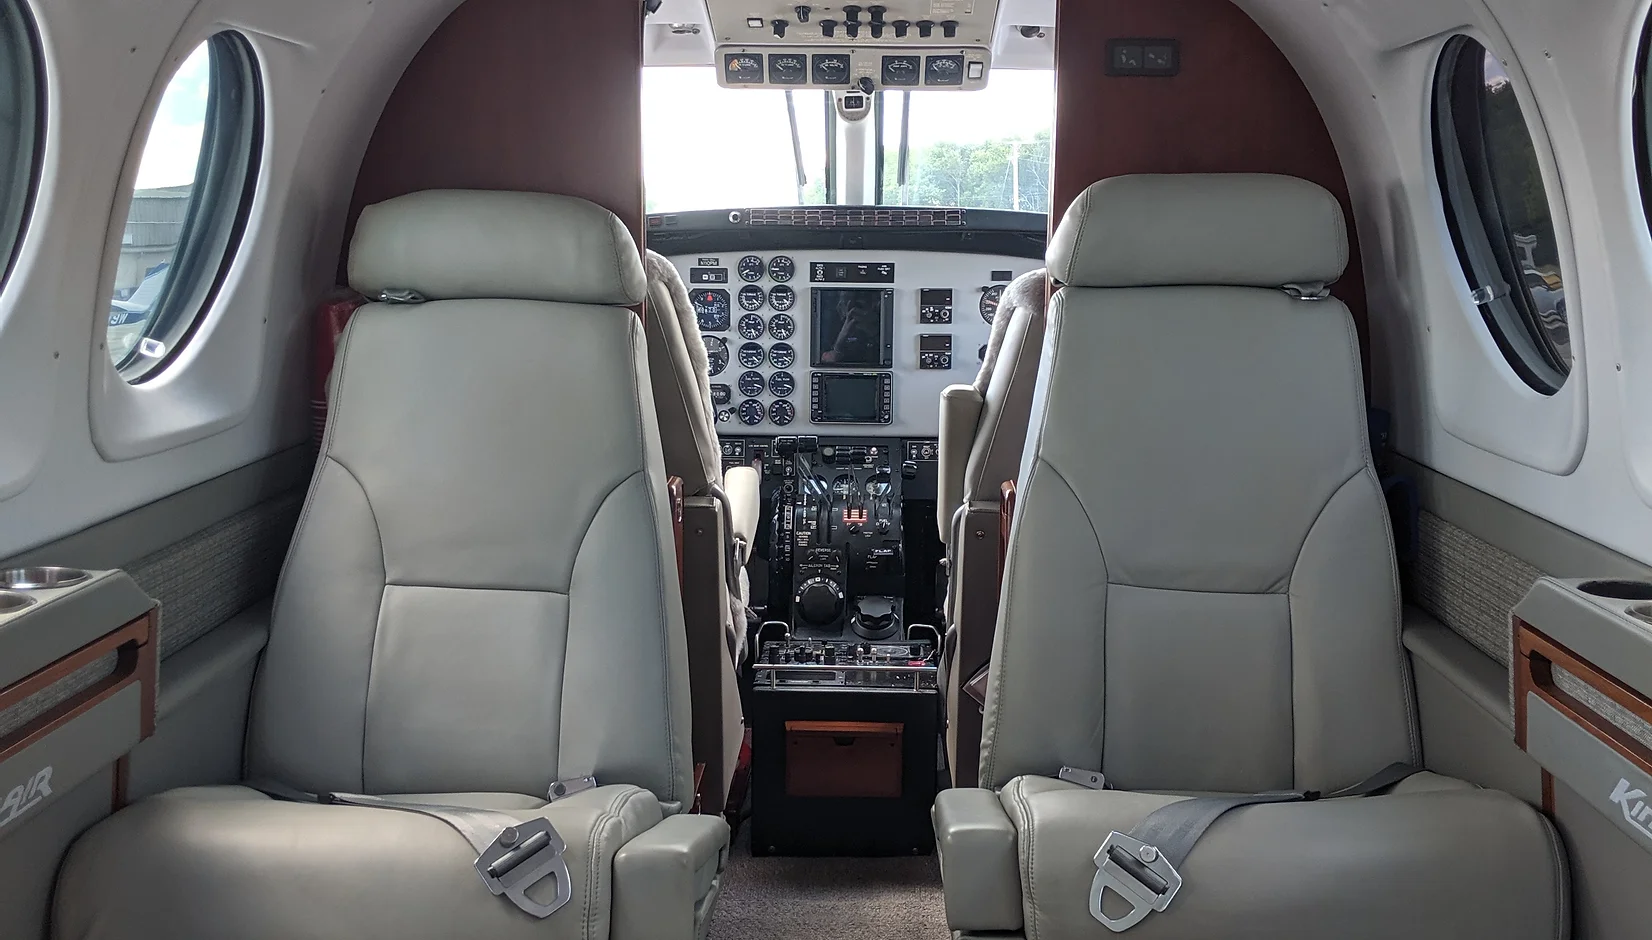 King Air C90B Interior2 | Griffing Private Air Charter Plane Flying Service in Port Clinton Ohio